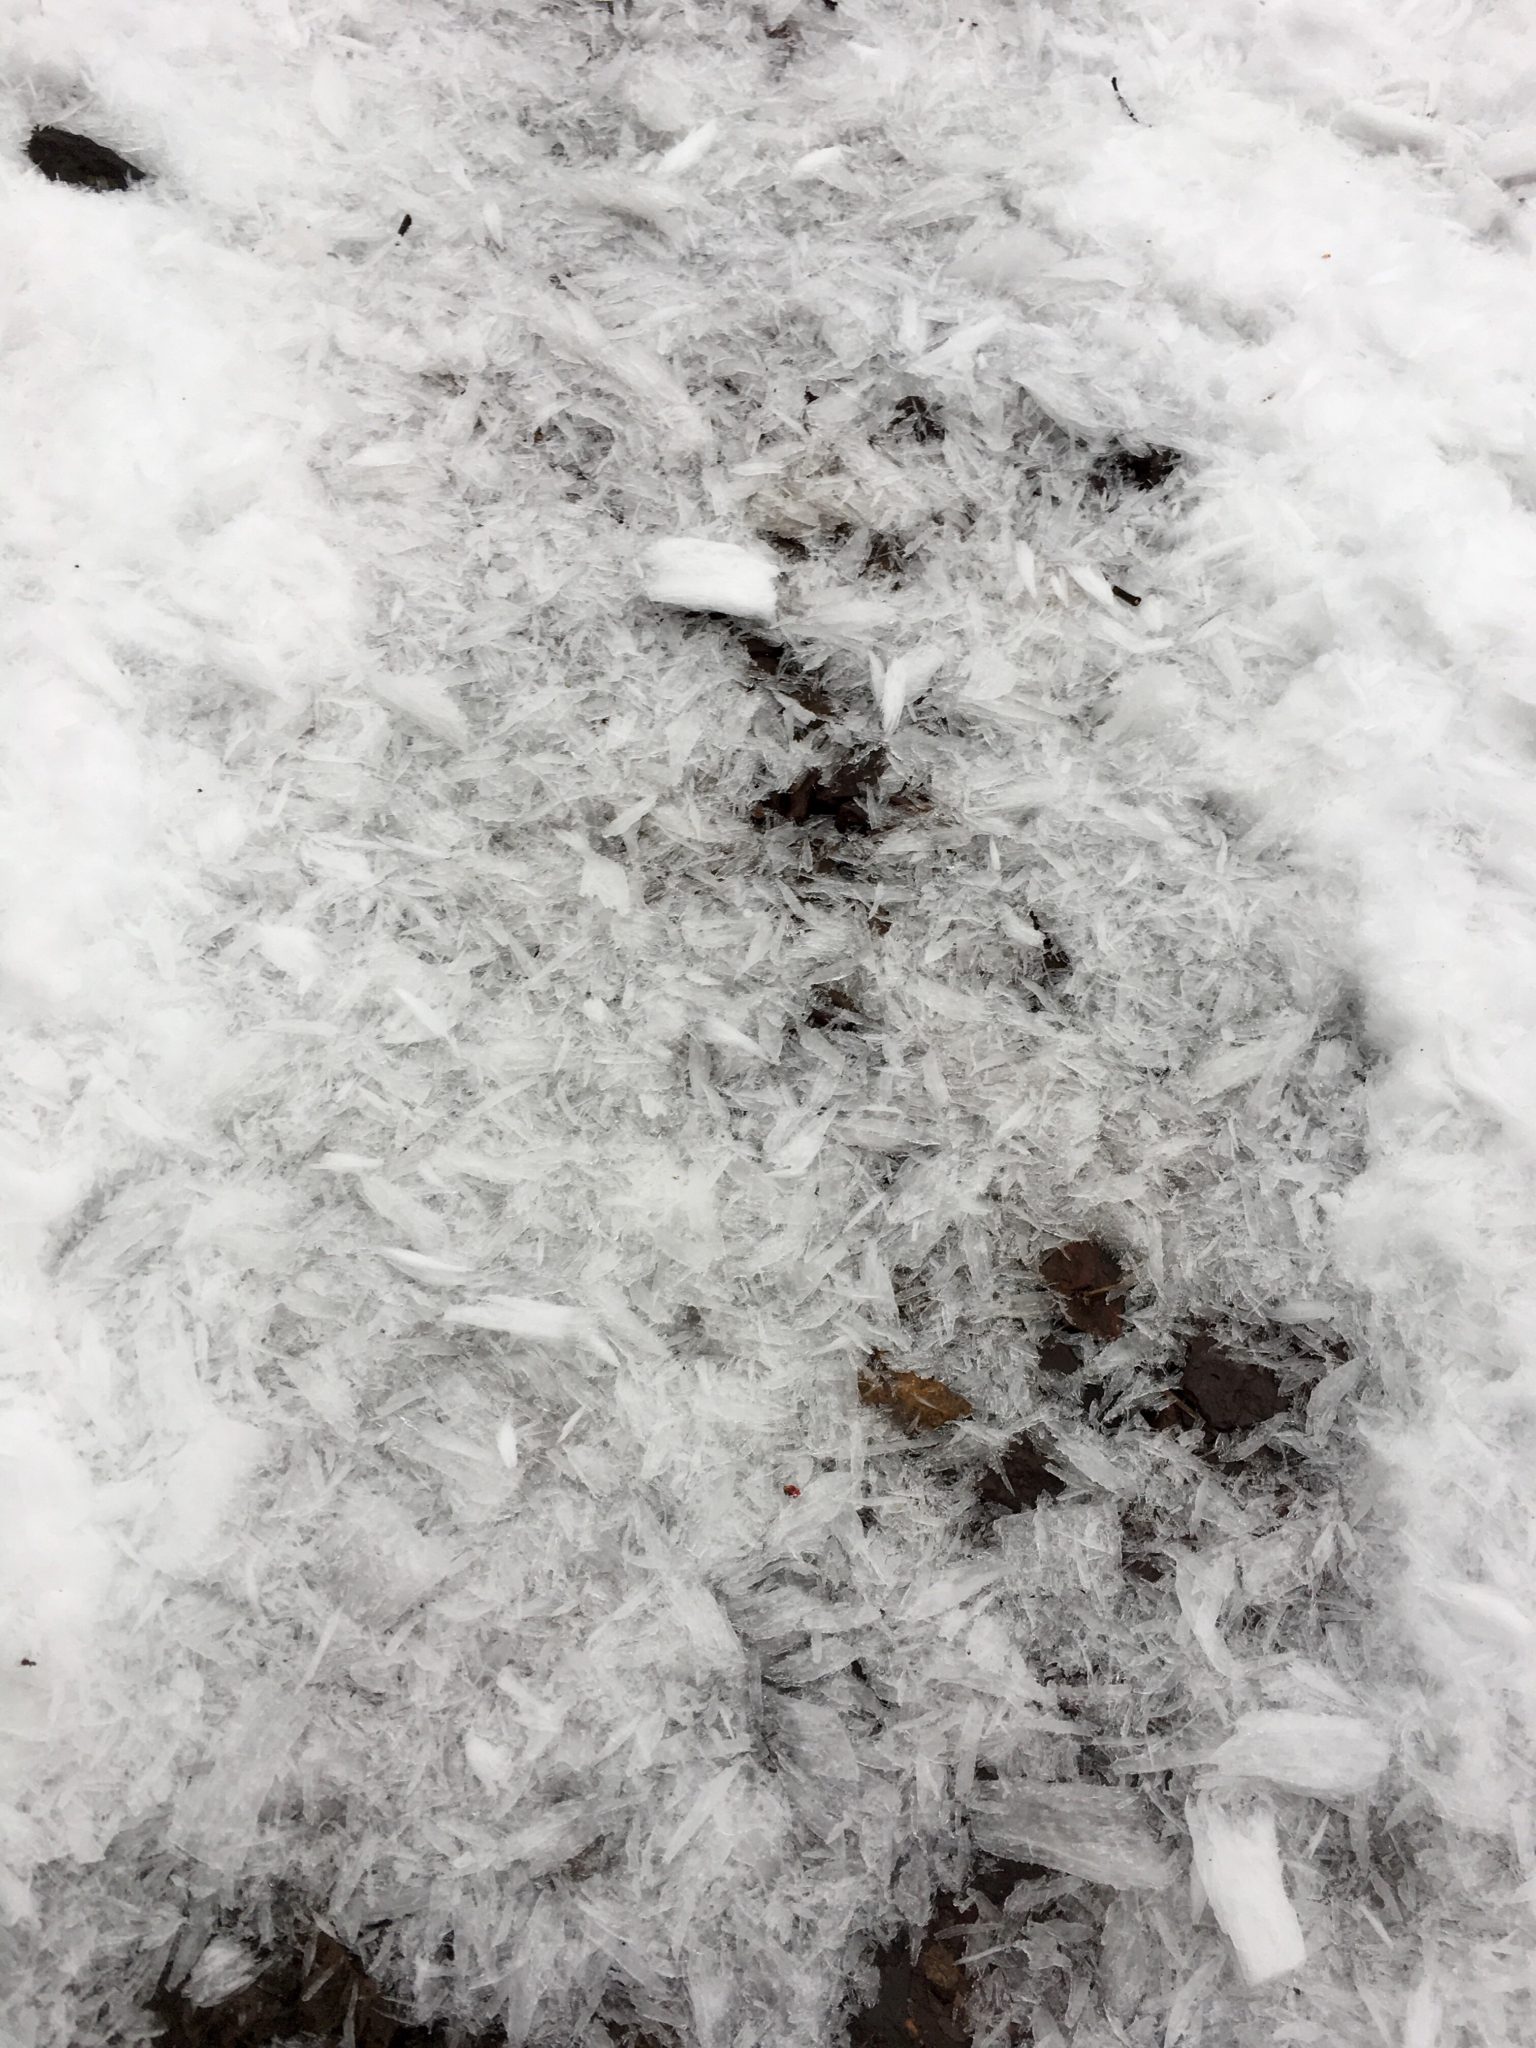 Interesting ice shapes covering the trail